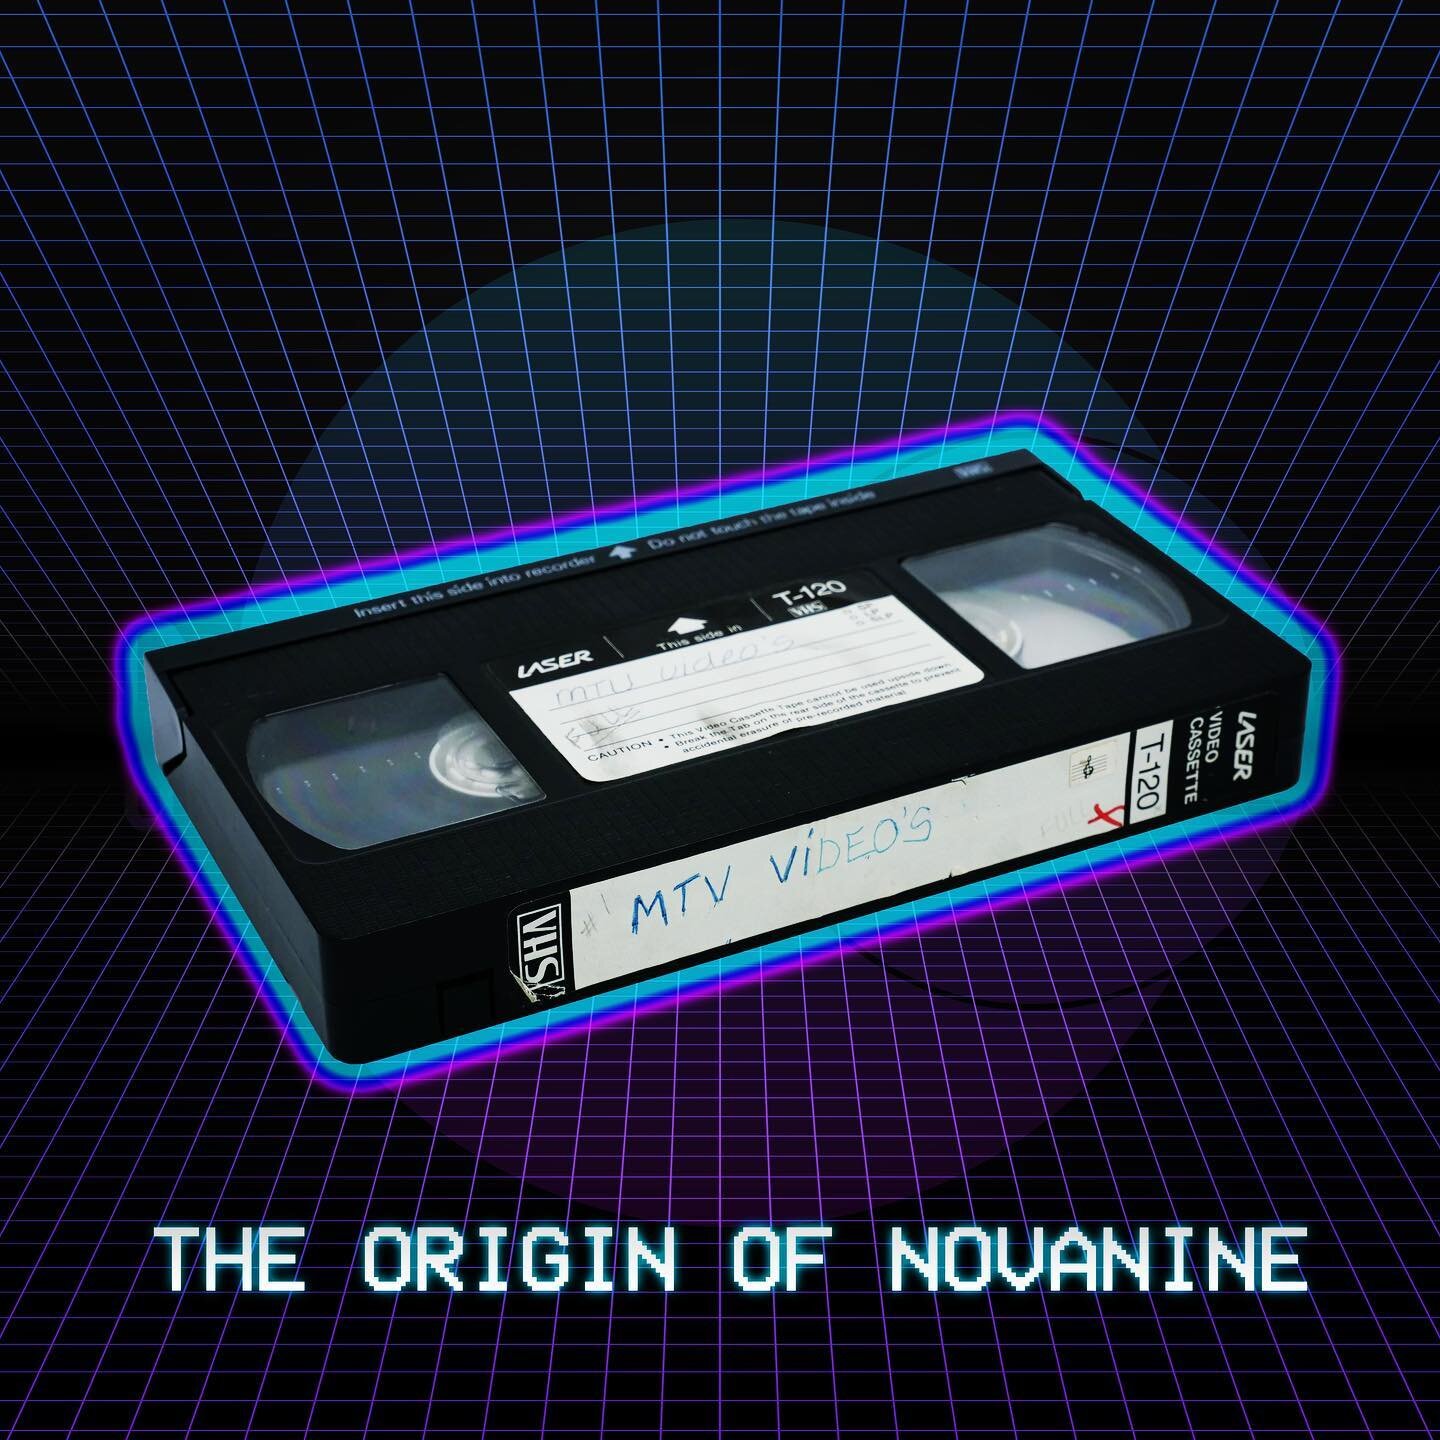 This VHS tape was the catalyst for NovaNine. 35 years ago, my parents would watch MTV and hit the record button on the VCR whenever a music video they liked came on. This left me with hours of the best 80s music, which I watched on repeat throughout 